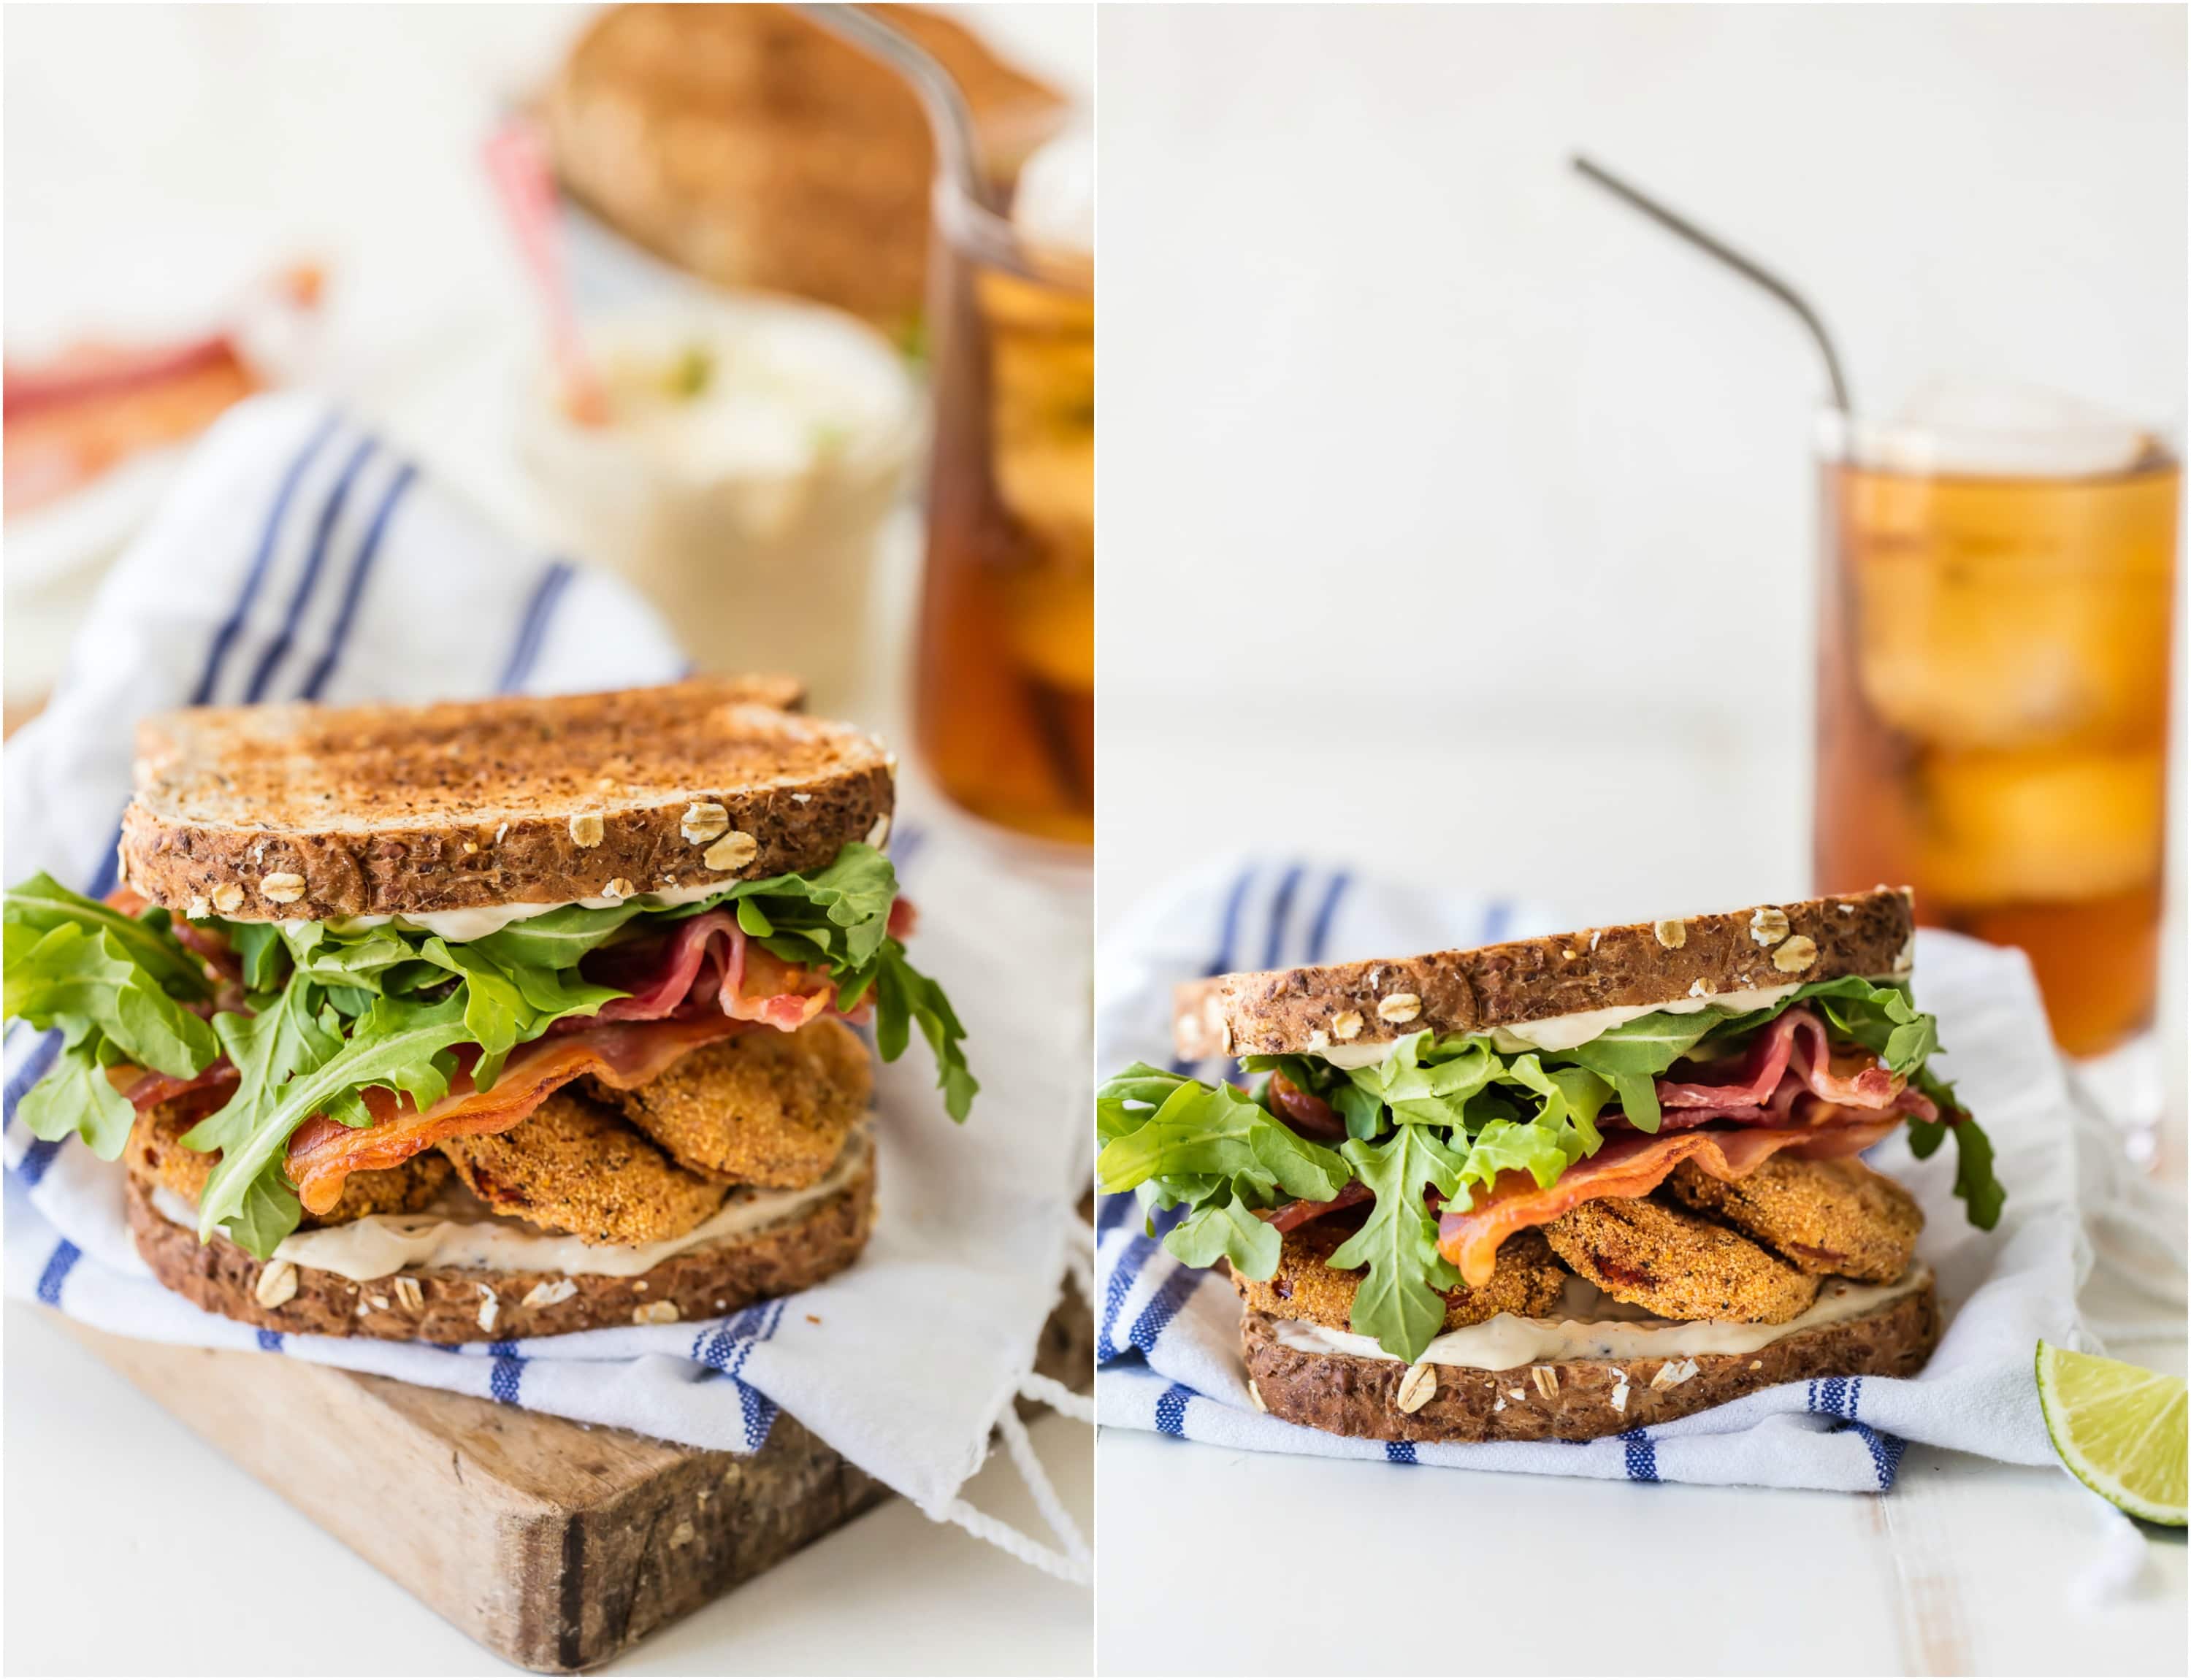 FRIED TOMATO BLTs with CILANTRO LIME MAYO is the best sandwich ever! Reimagine this classic recipe and make it a family favorite! Loaded with herbed fried tomatoes, cilantro lime mayo, arugula, and BACON!